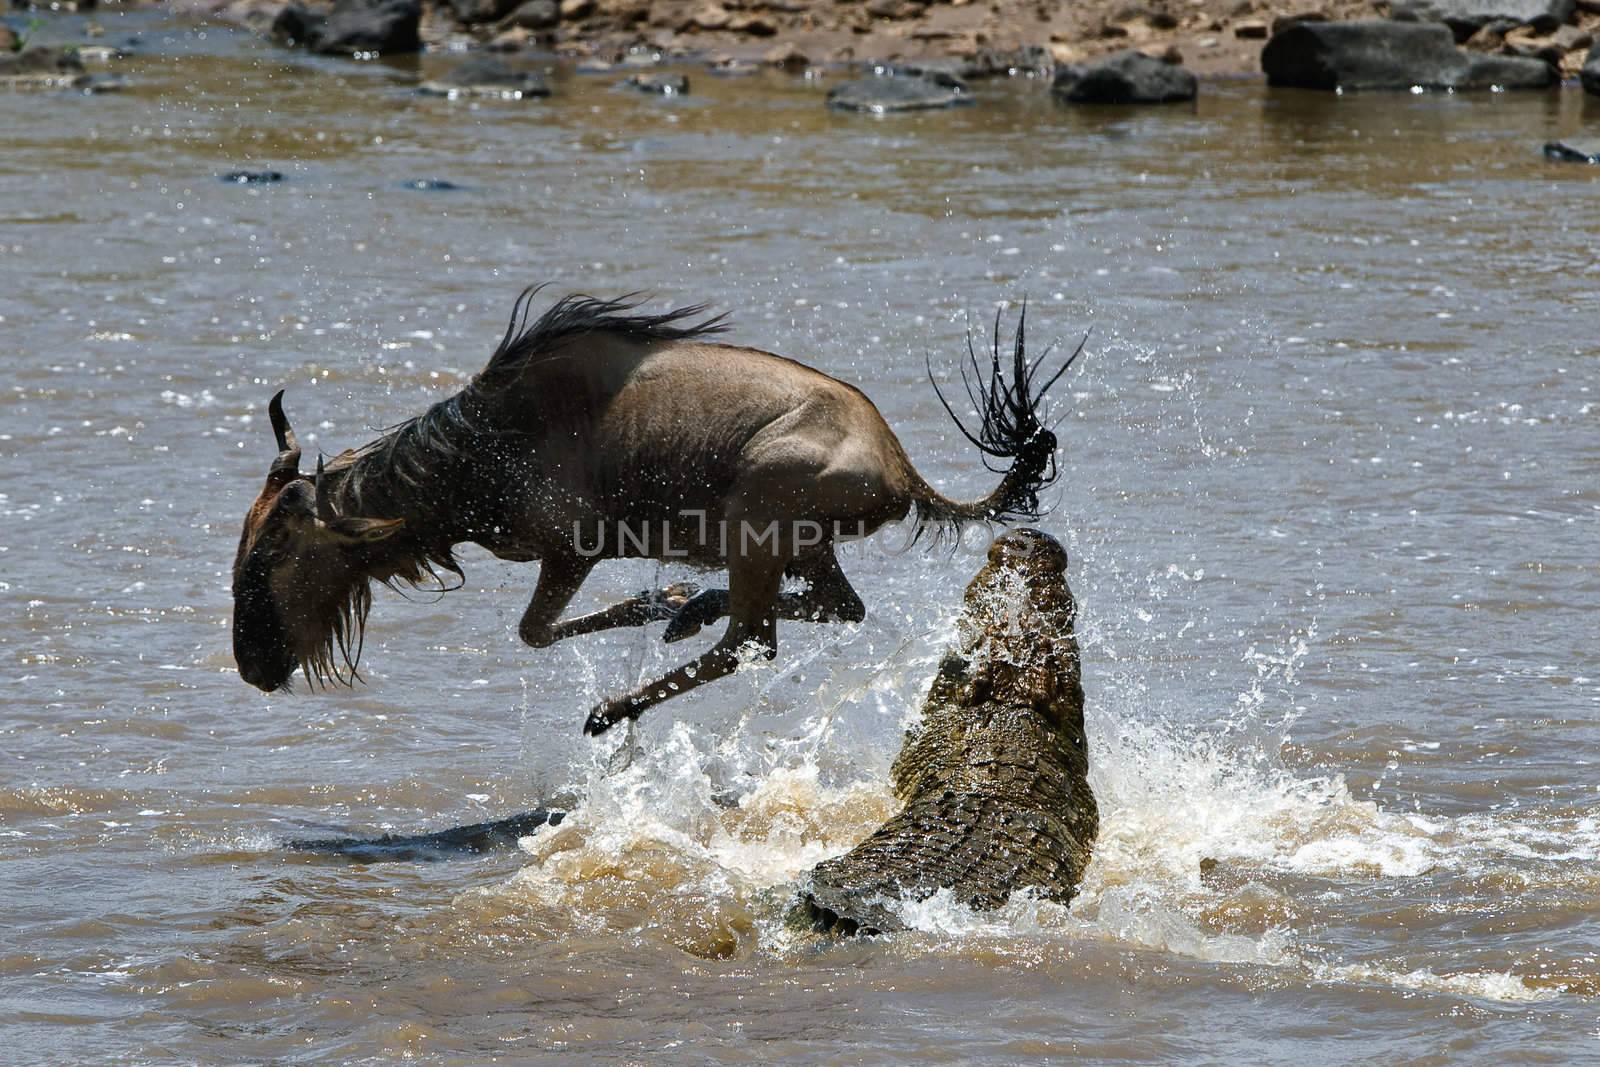 Crossing through the river Mara.The antelope has undergone to an attack of a crocodile.